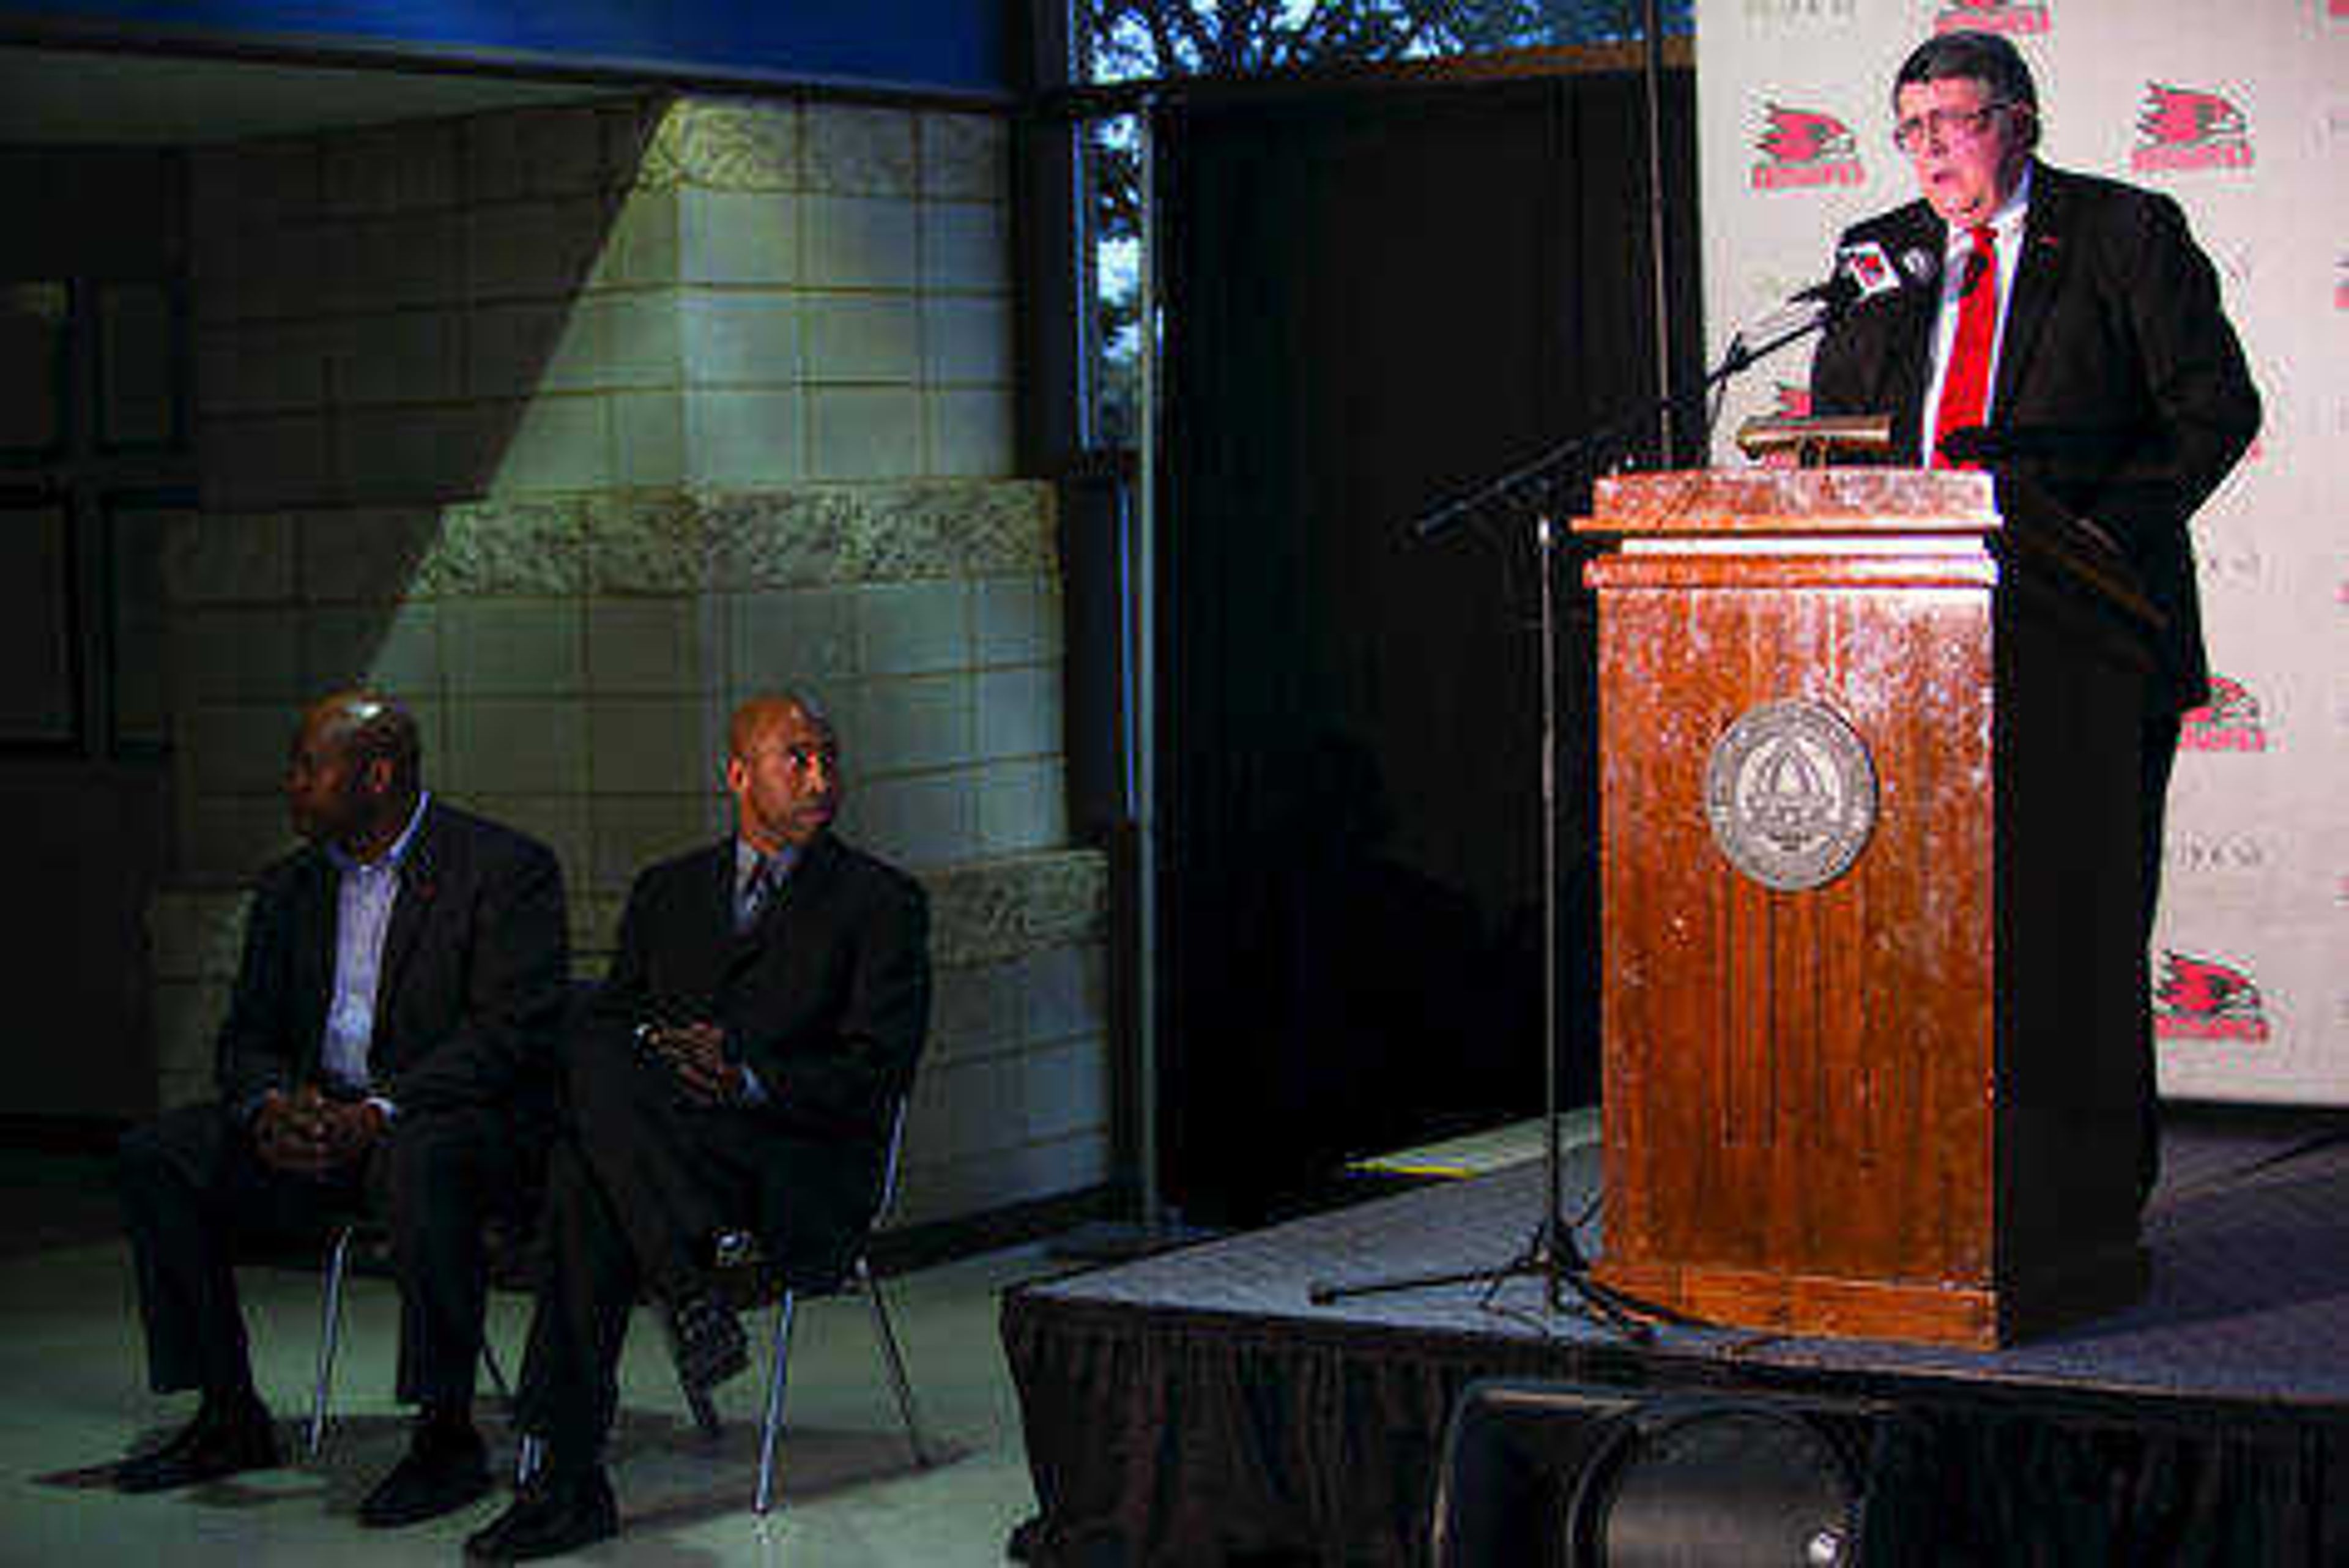 President Dr. Kenneth W. Dobbins addresses attendees at the press conference announcing the new men's basketball coach, Rick Ray, on April 13 at the Show Me Center. Photo by Jeganaath Mudaliar